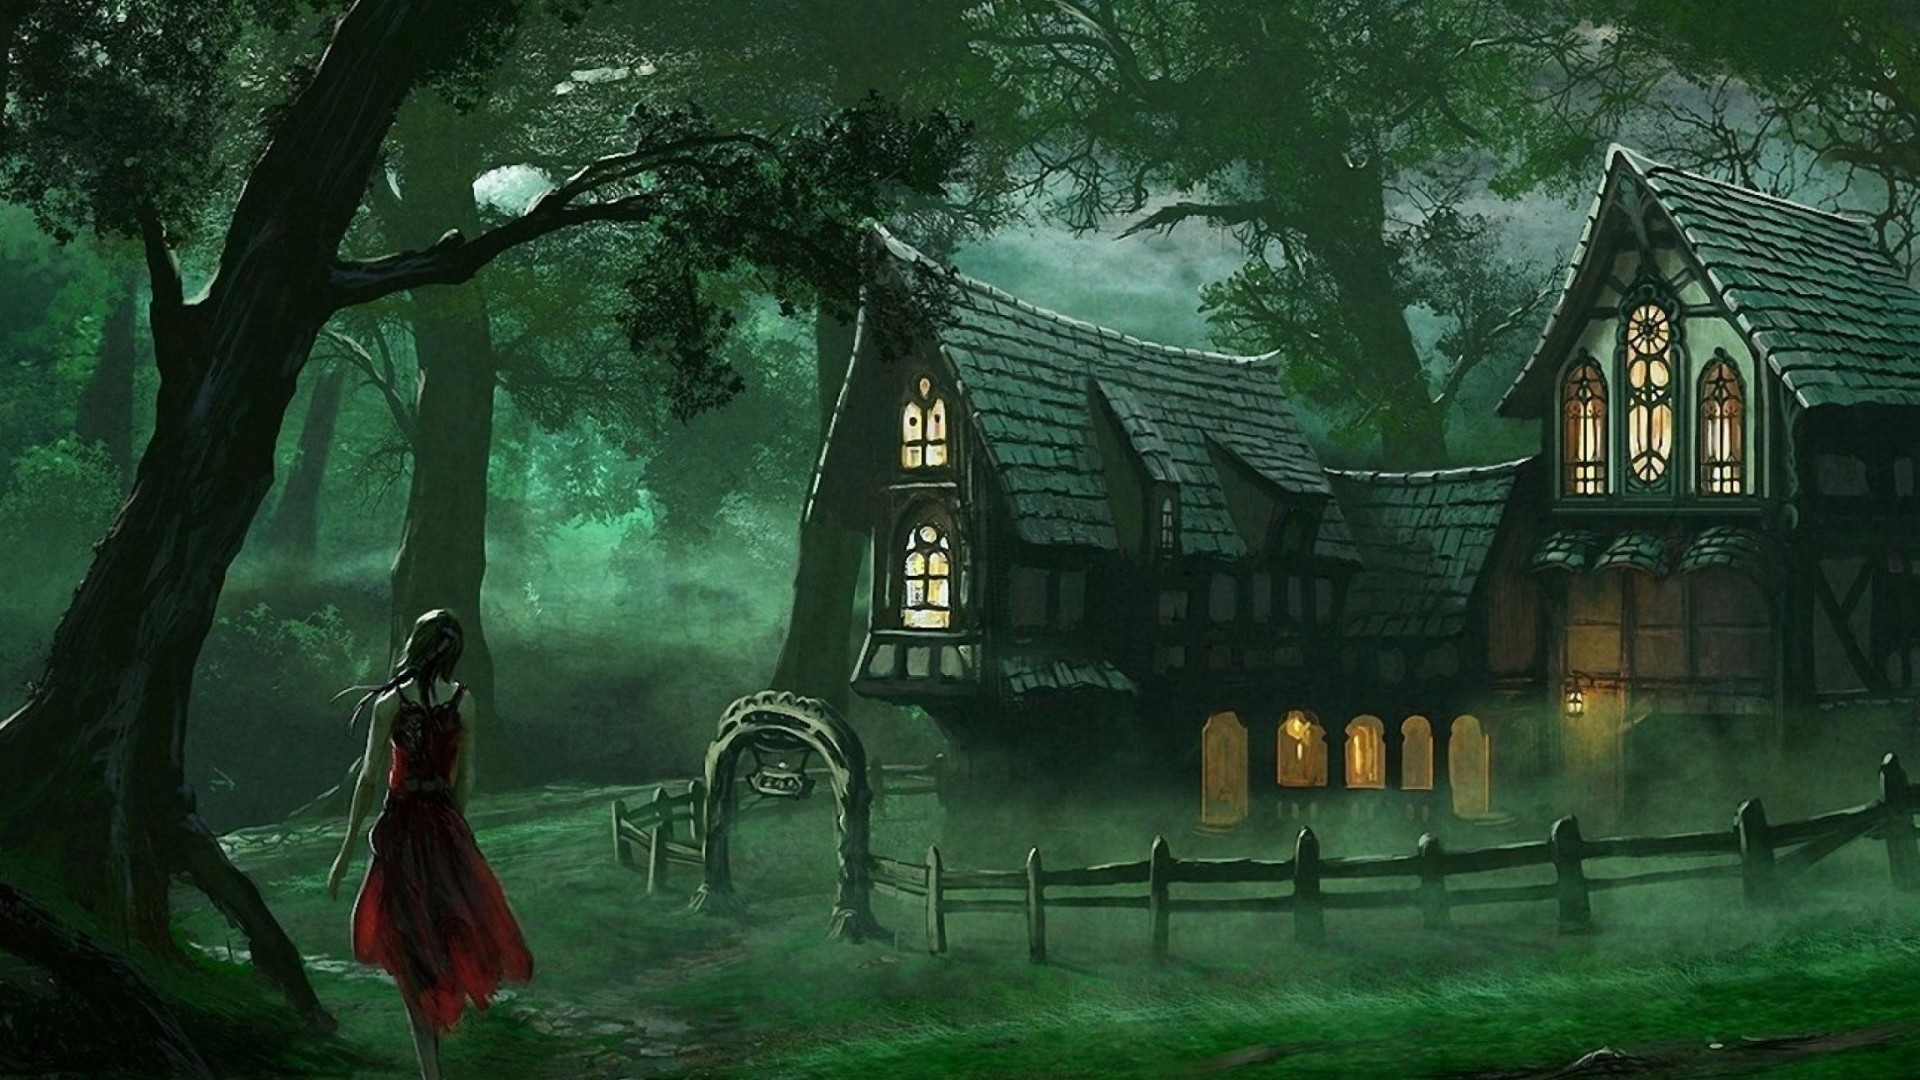 1920x1080 Spooky House Fantasy Forest wallpaper HD [1920 1080]